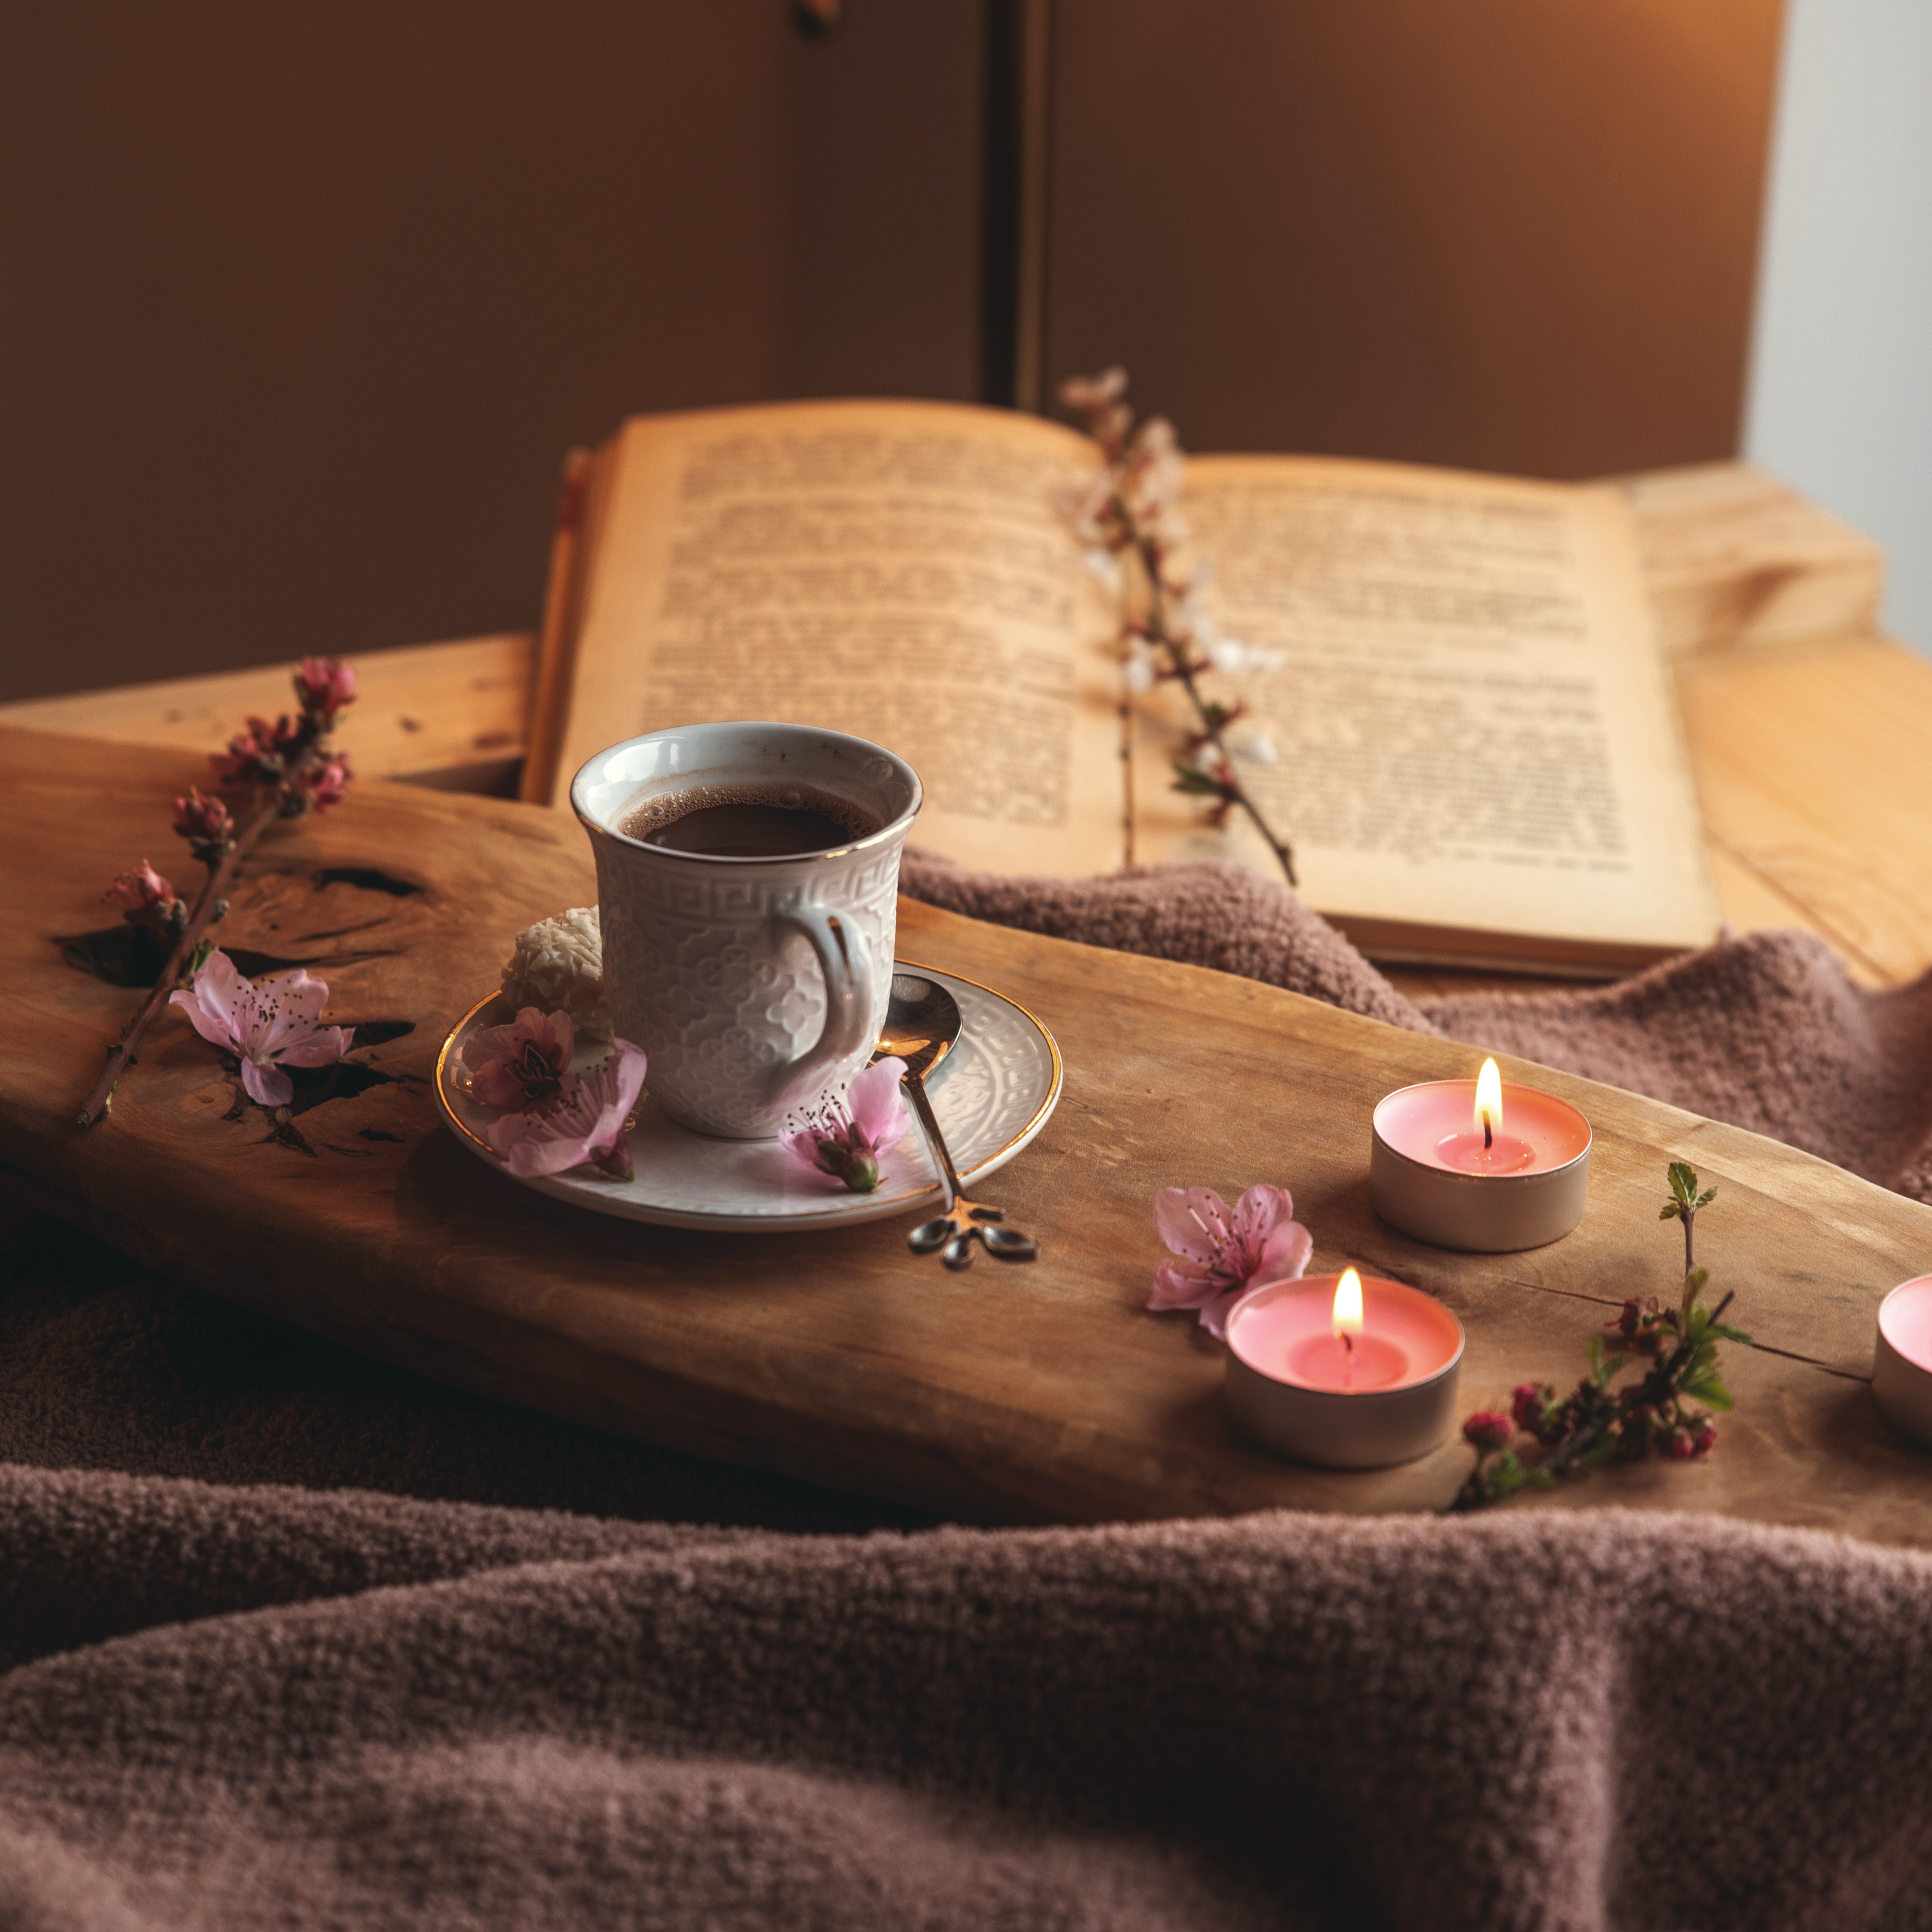 Phone Background Full HD cup, cocoa, food, flowers